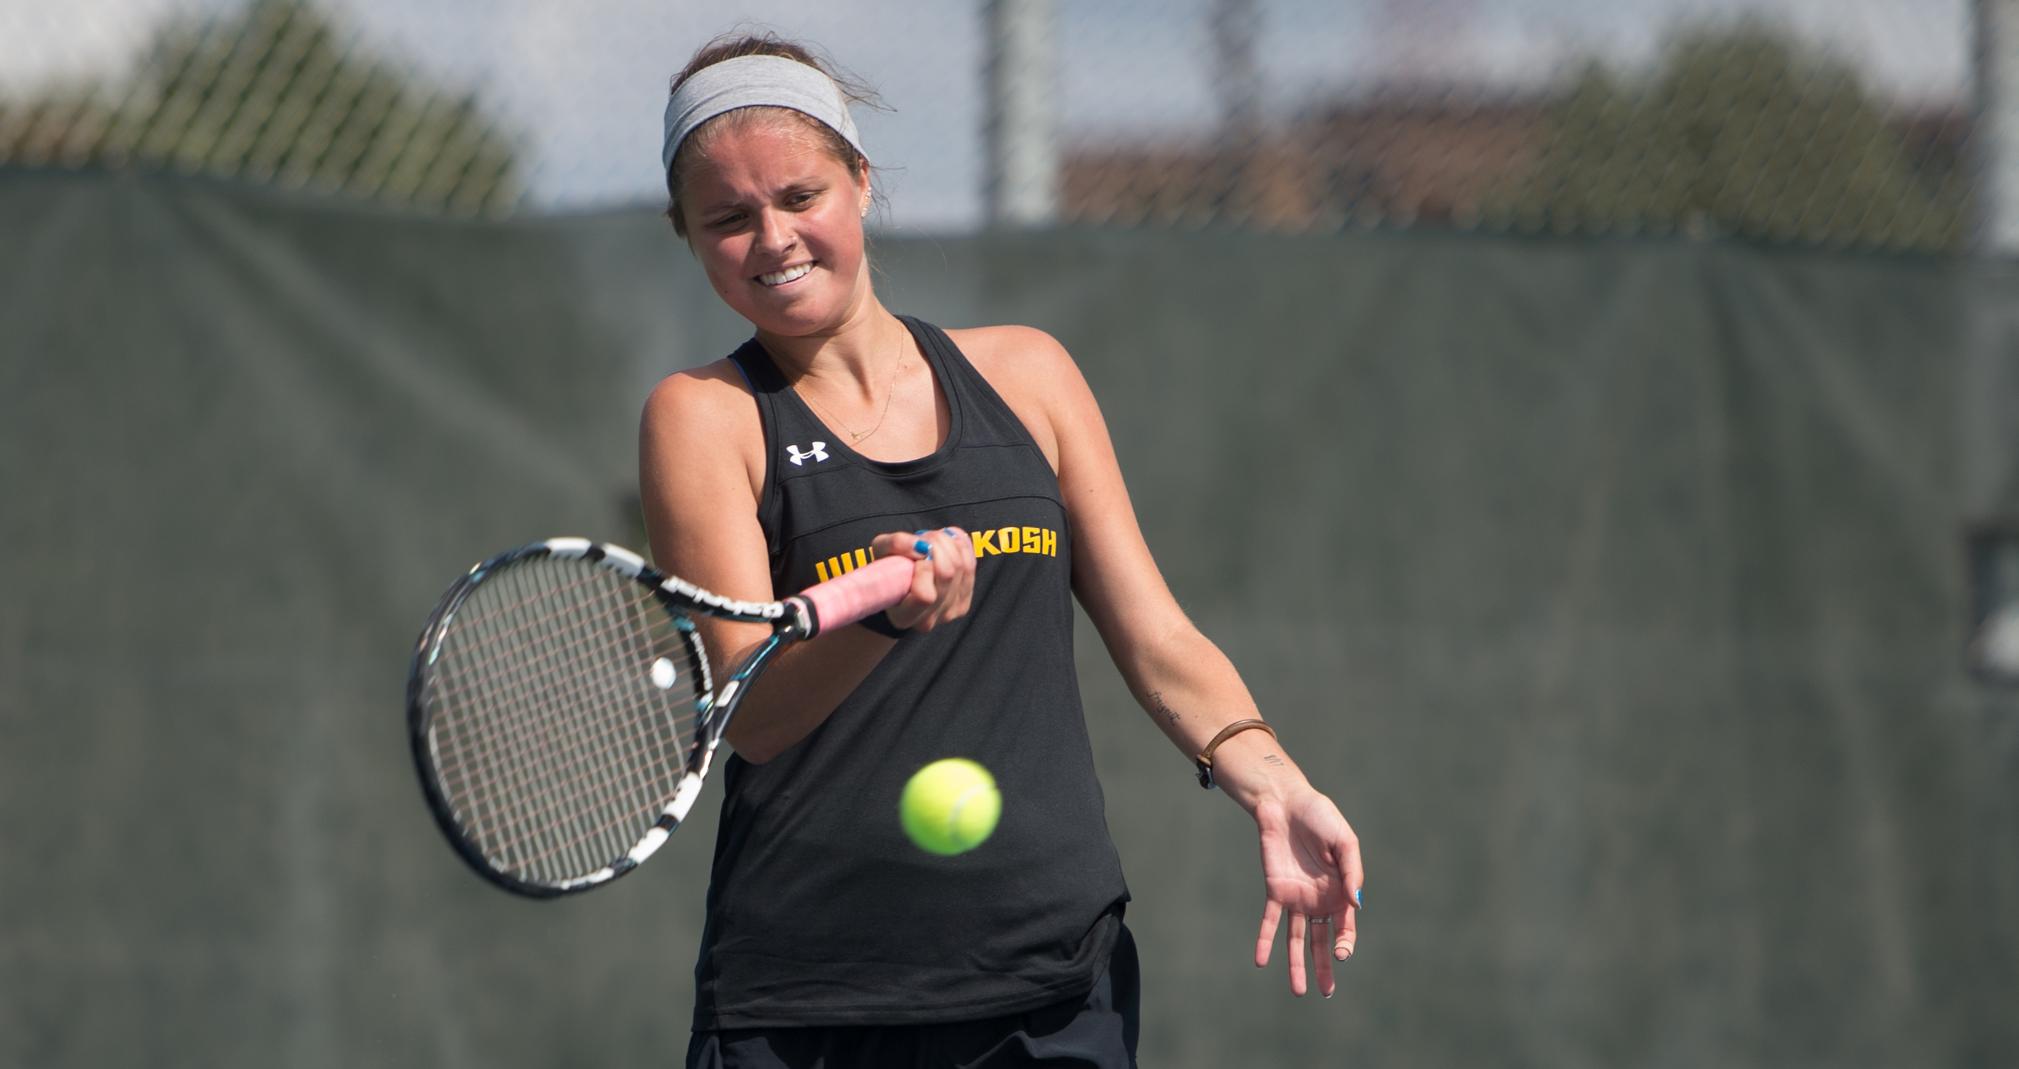 Hannah Nauth and Ashlee Polena (pictured) lost an 8-2 decision at No. 3 doubles against the Blugolds.